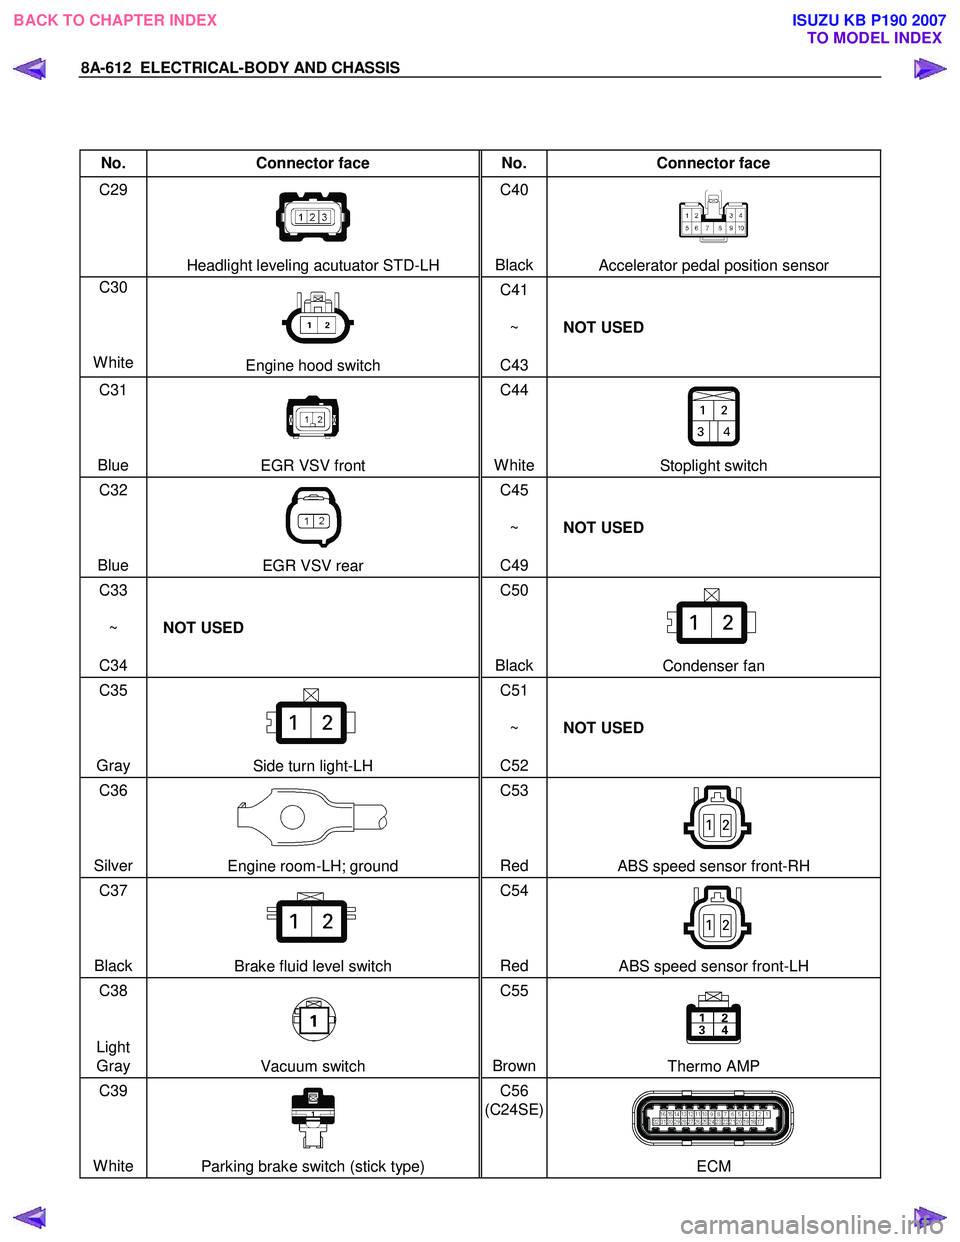 ISUZU KB P190 2007  Workshop Repair Manual 8A-612  ELECTRICAL-BODY AND CHASSIS 
 
 
No. Connector face  No. Connector face 
C29 
  
 
 
 
Headlight leveling acutuator STD-LH  C40 
 
 
 
BlackAccelerator pedal position sensor 
C30   
 
 
White 